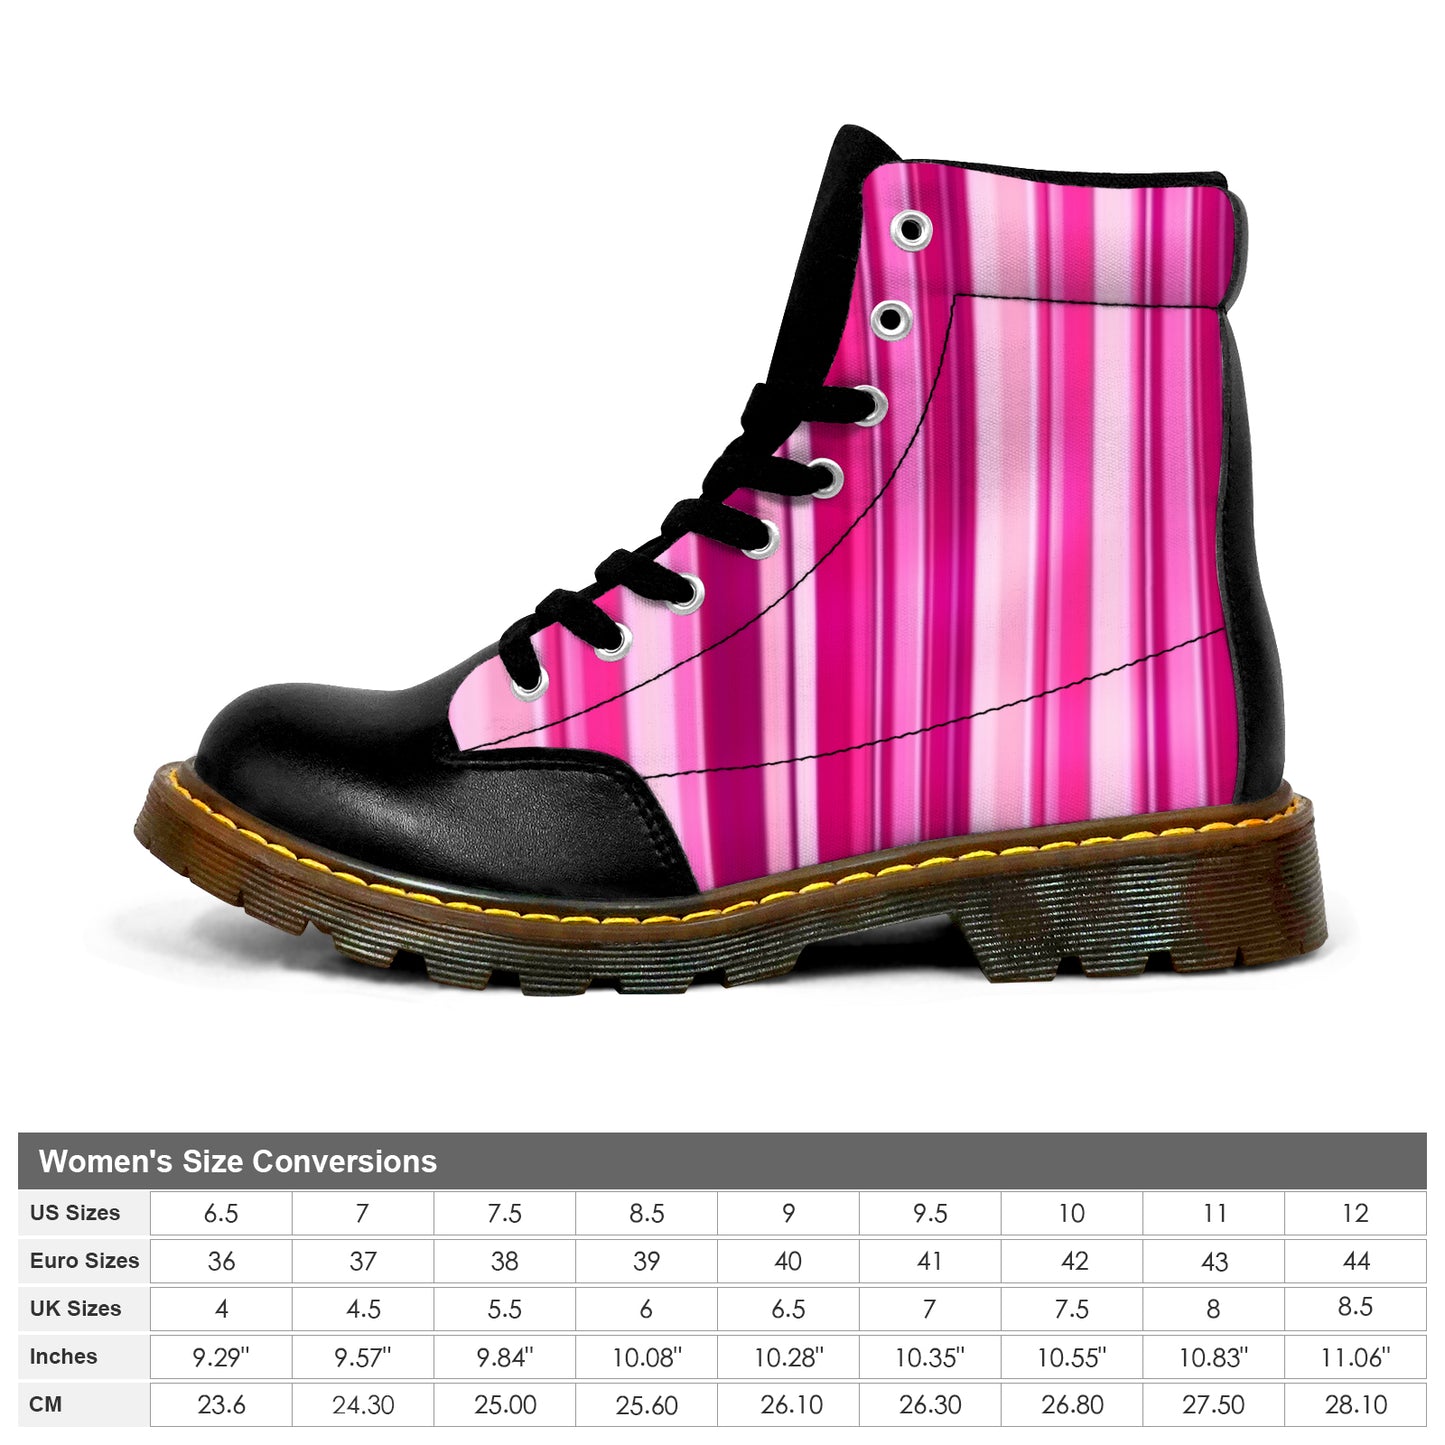 Winter Round Toe Women's Boots - Pink Stripes